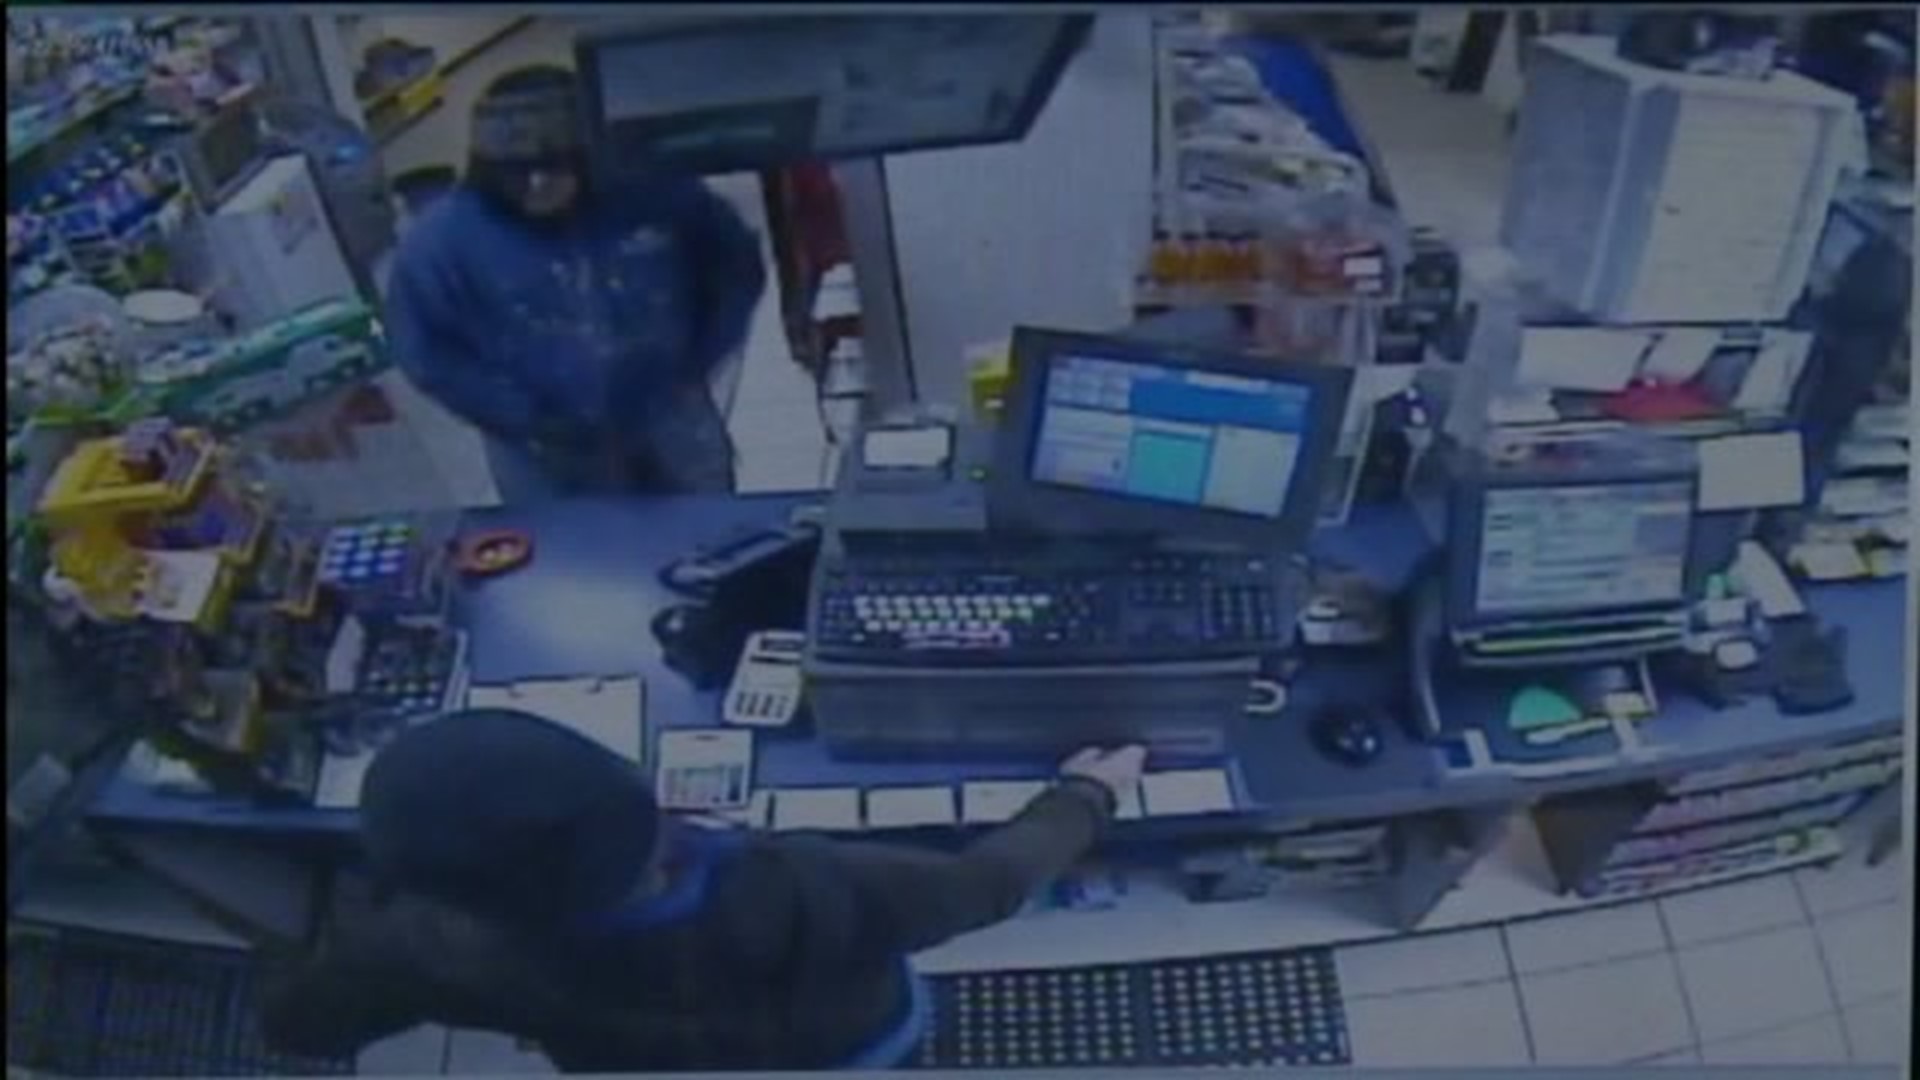 Police Searching for Armed Robbery Suspect